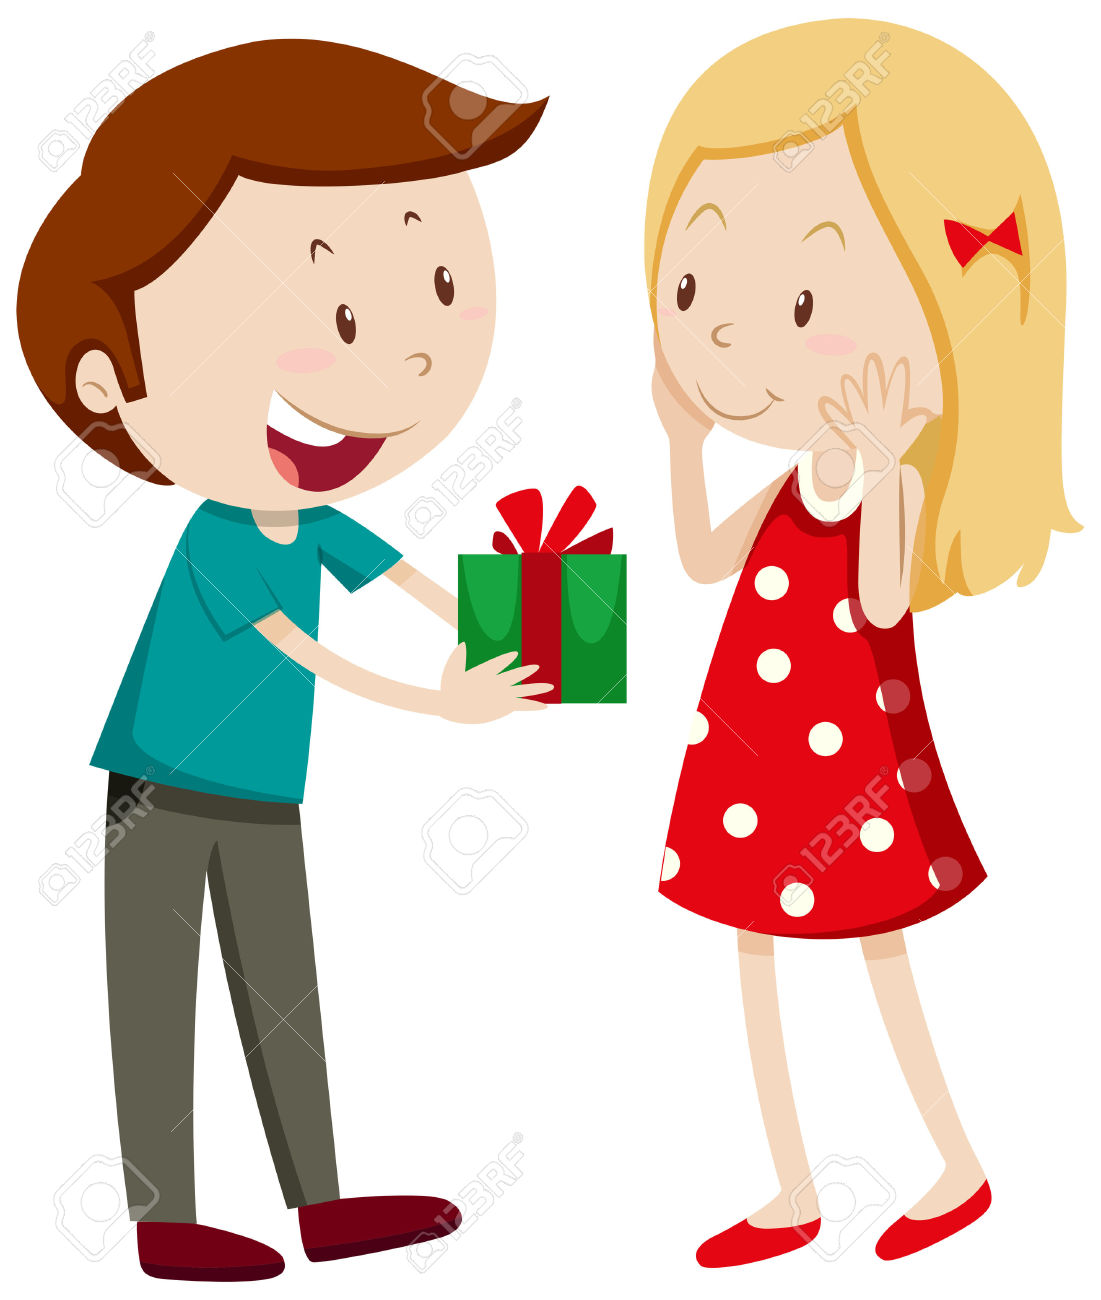 Free download best on. Gift clipart gift giving